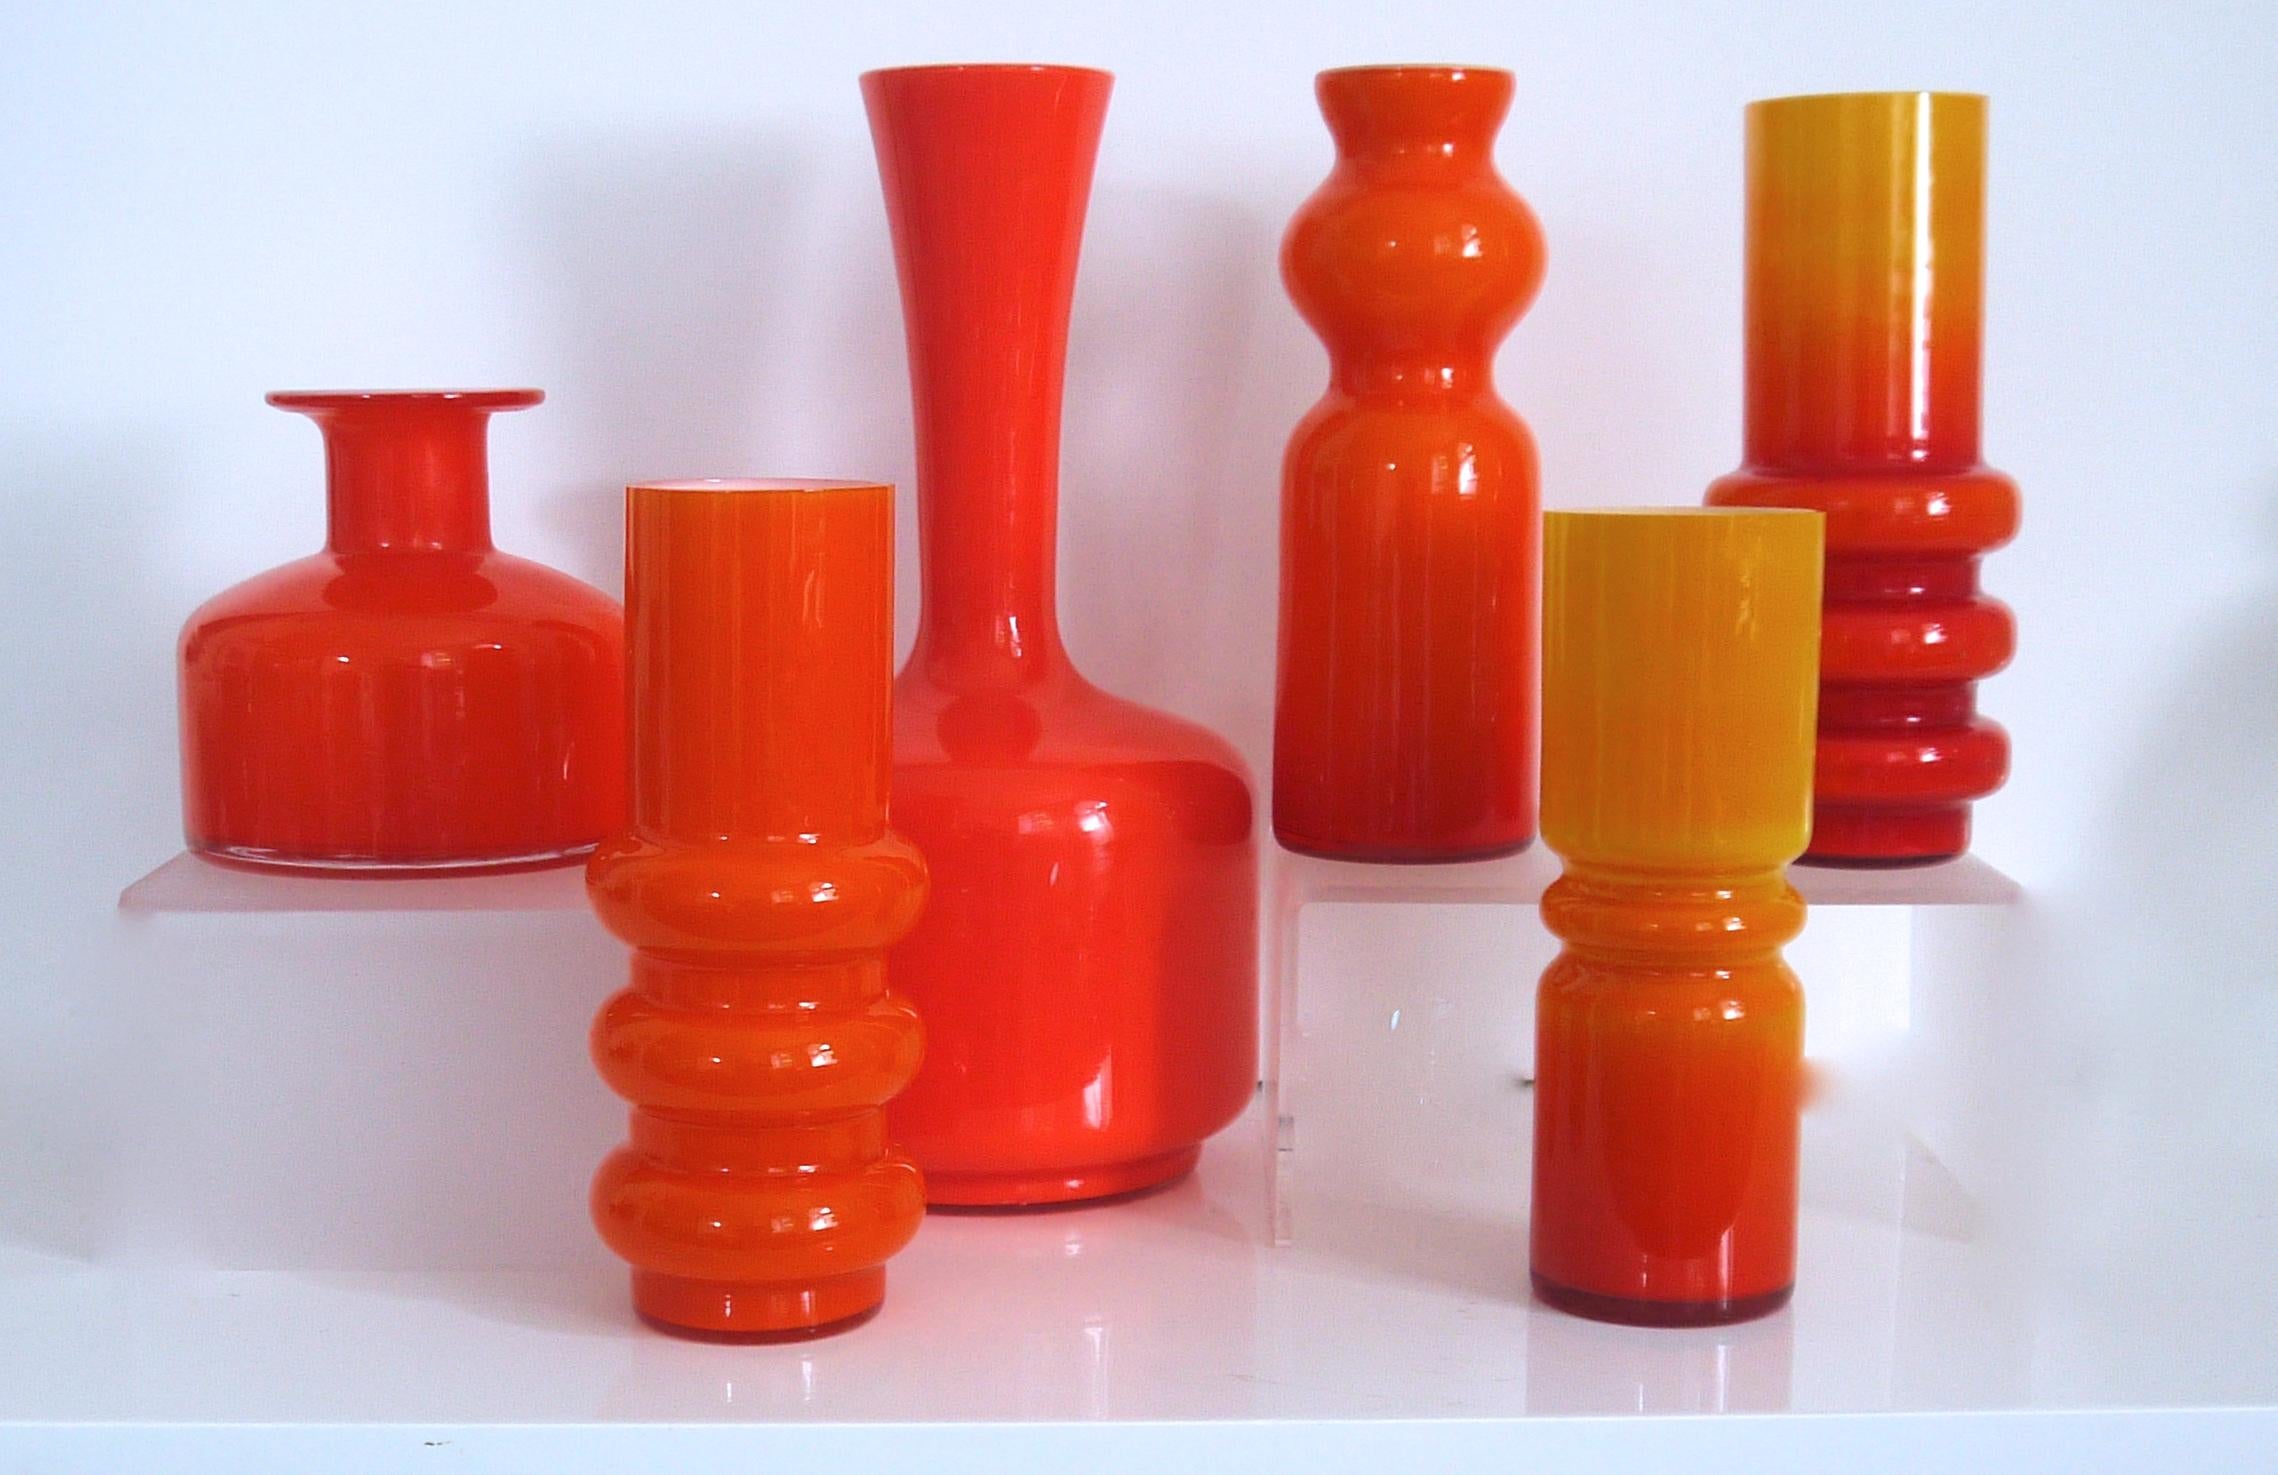 Art Glass Scandinavian Modern Collection of Orange Hooped Glass Vases by Ryd, Mid-1970s For Sale